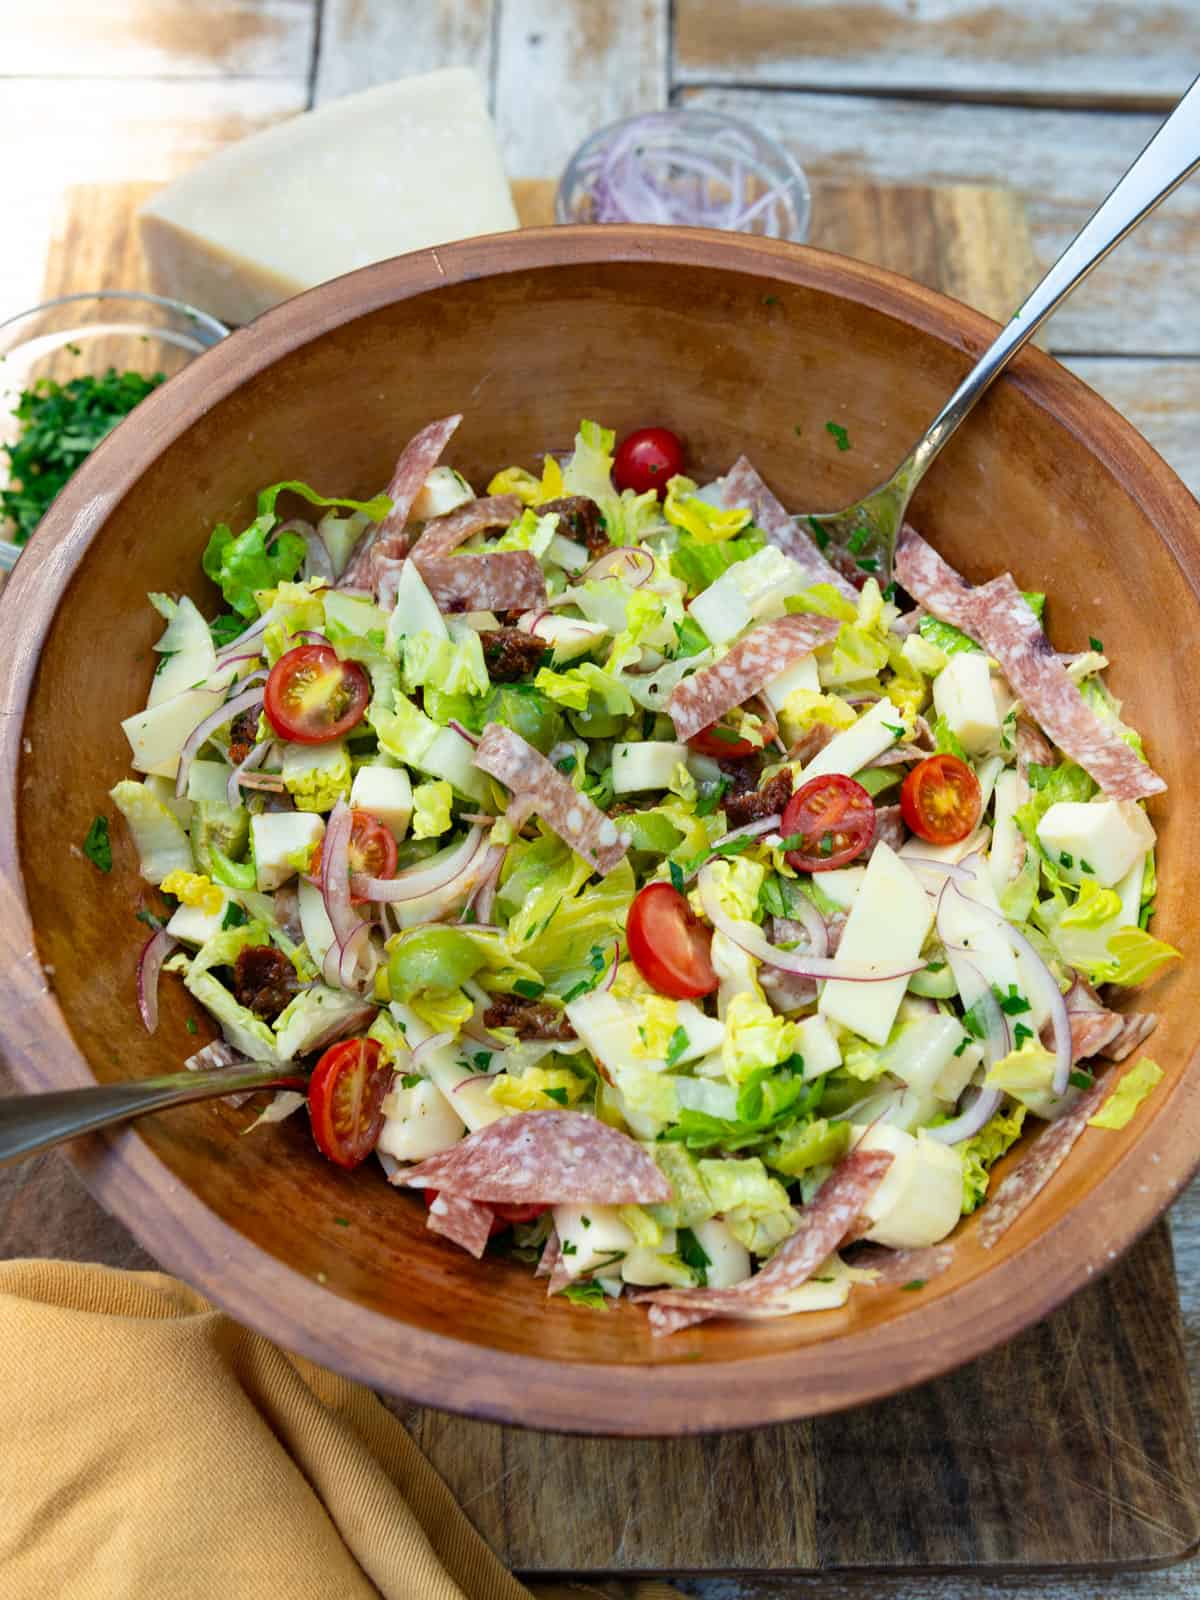 Chopped antipasto salad recipe with romaine, provolone cheese, salami and olives.